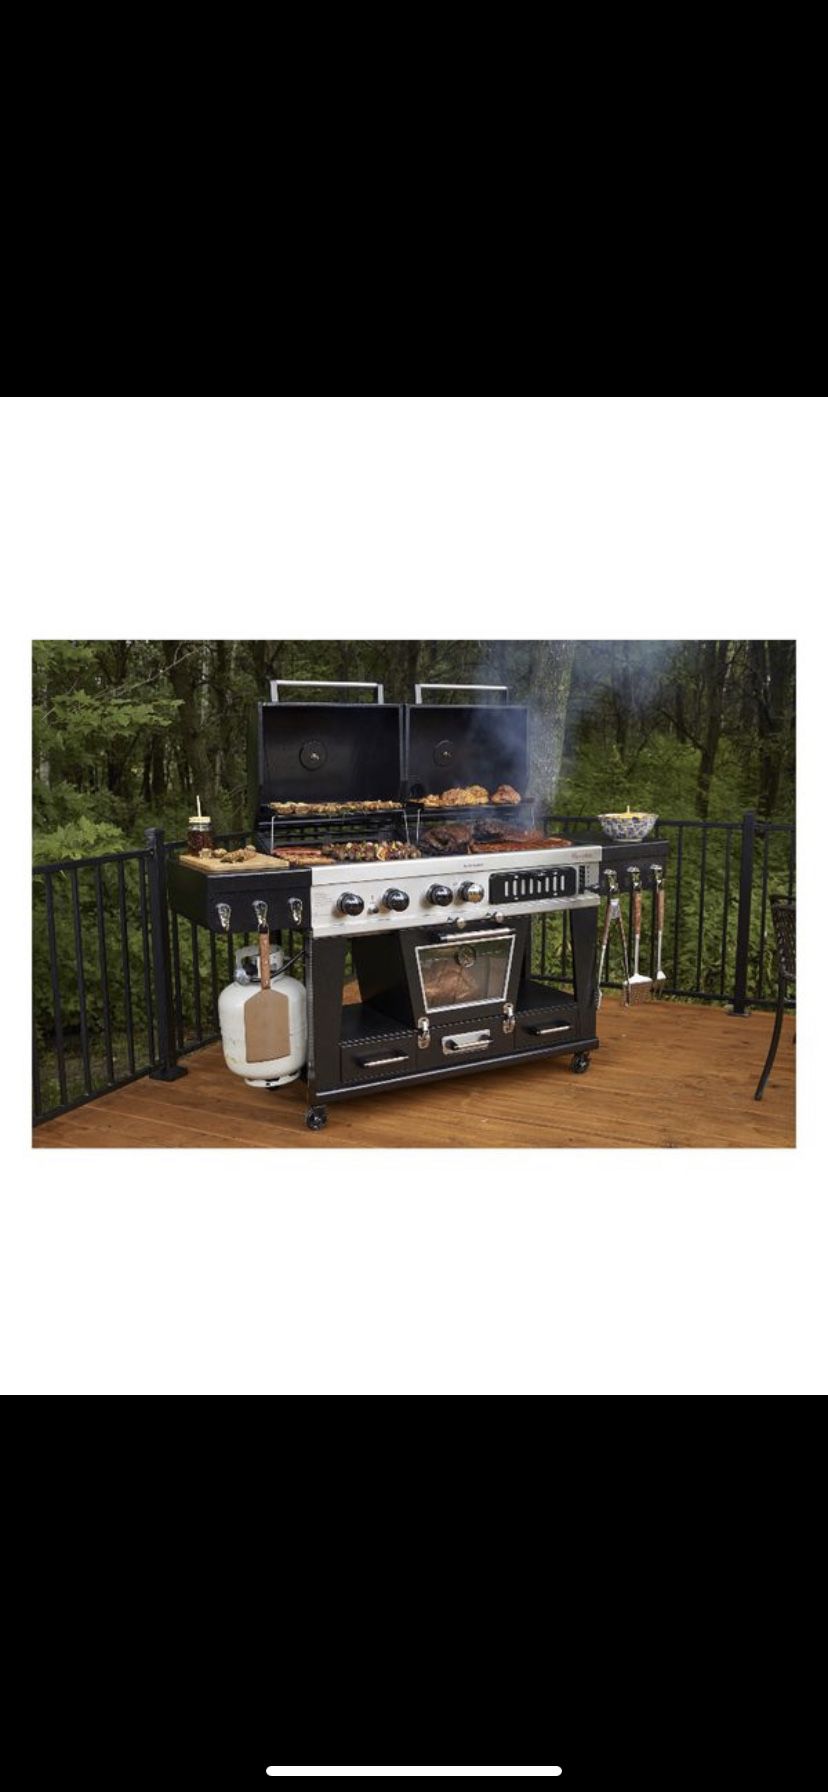 PIT BOSS Memphis ultimate 4 in one gas/charcoal combo grill with smoker brand new